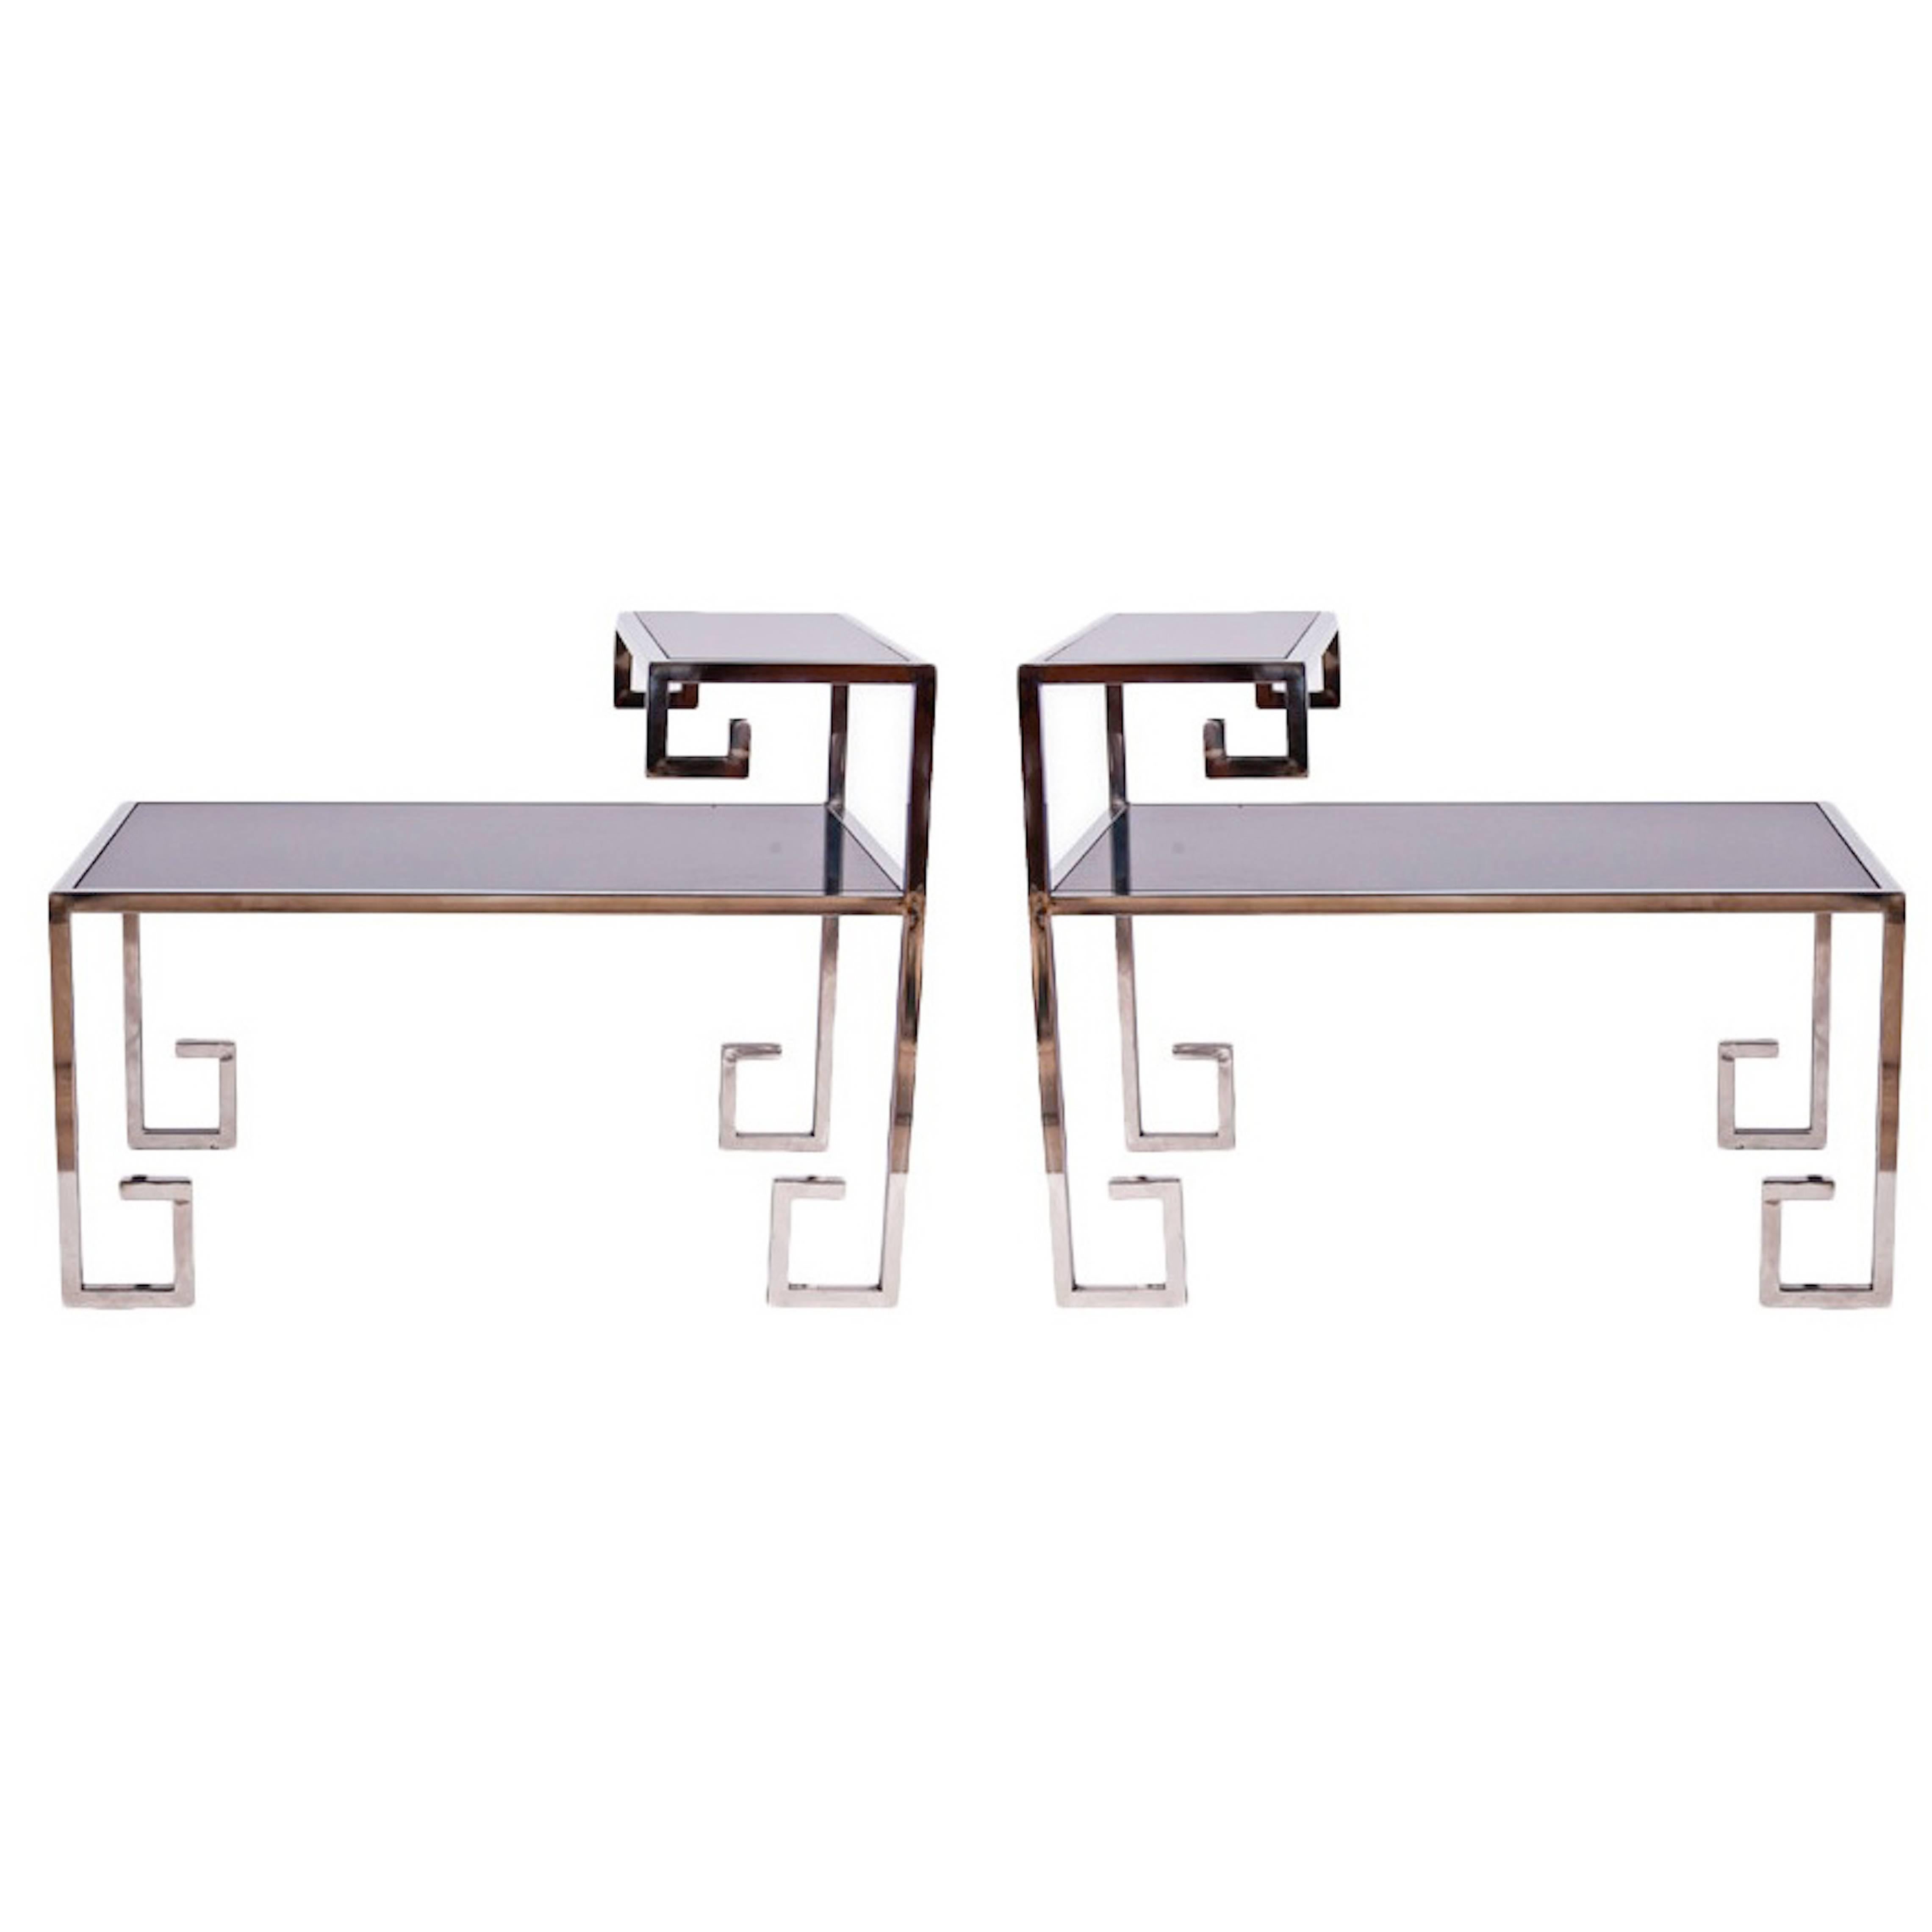 Pair of Greek Key Chrome and Polished Stone Side Tables